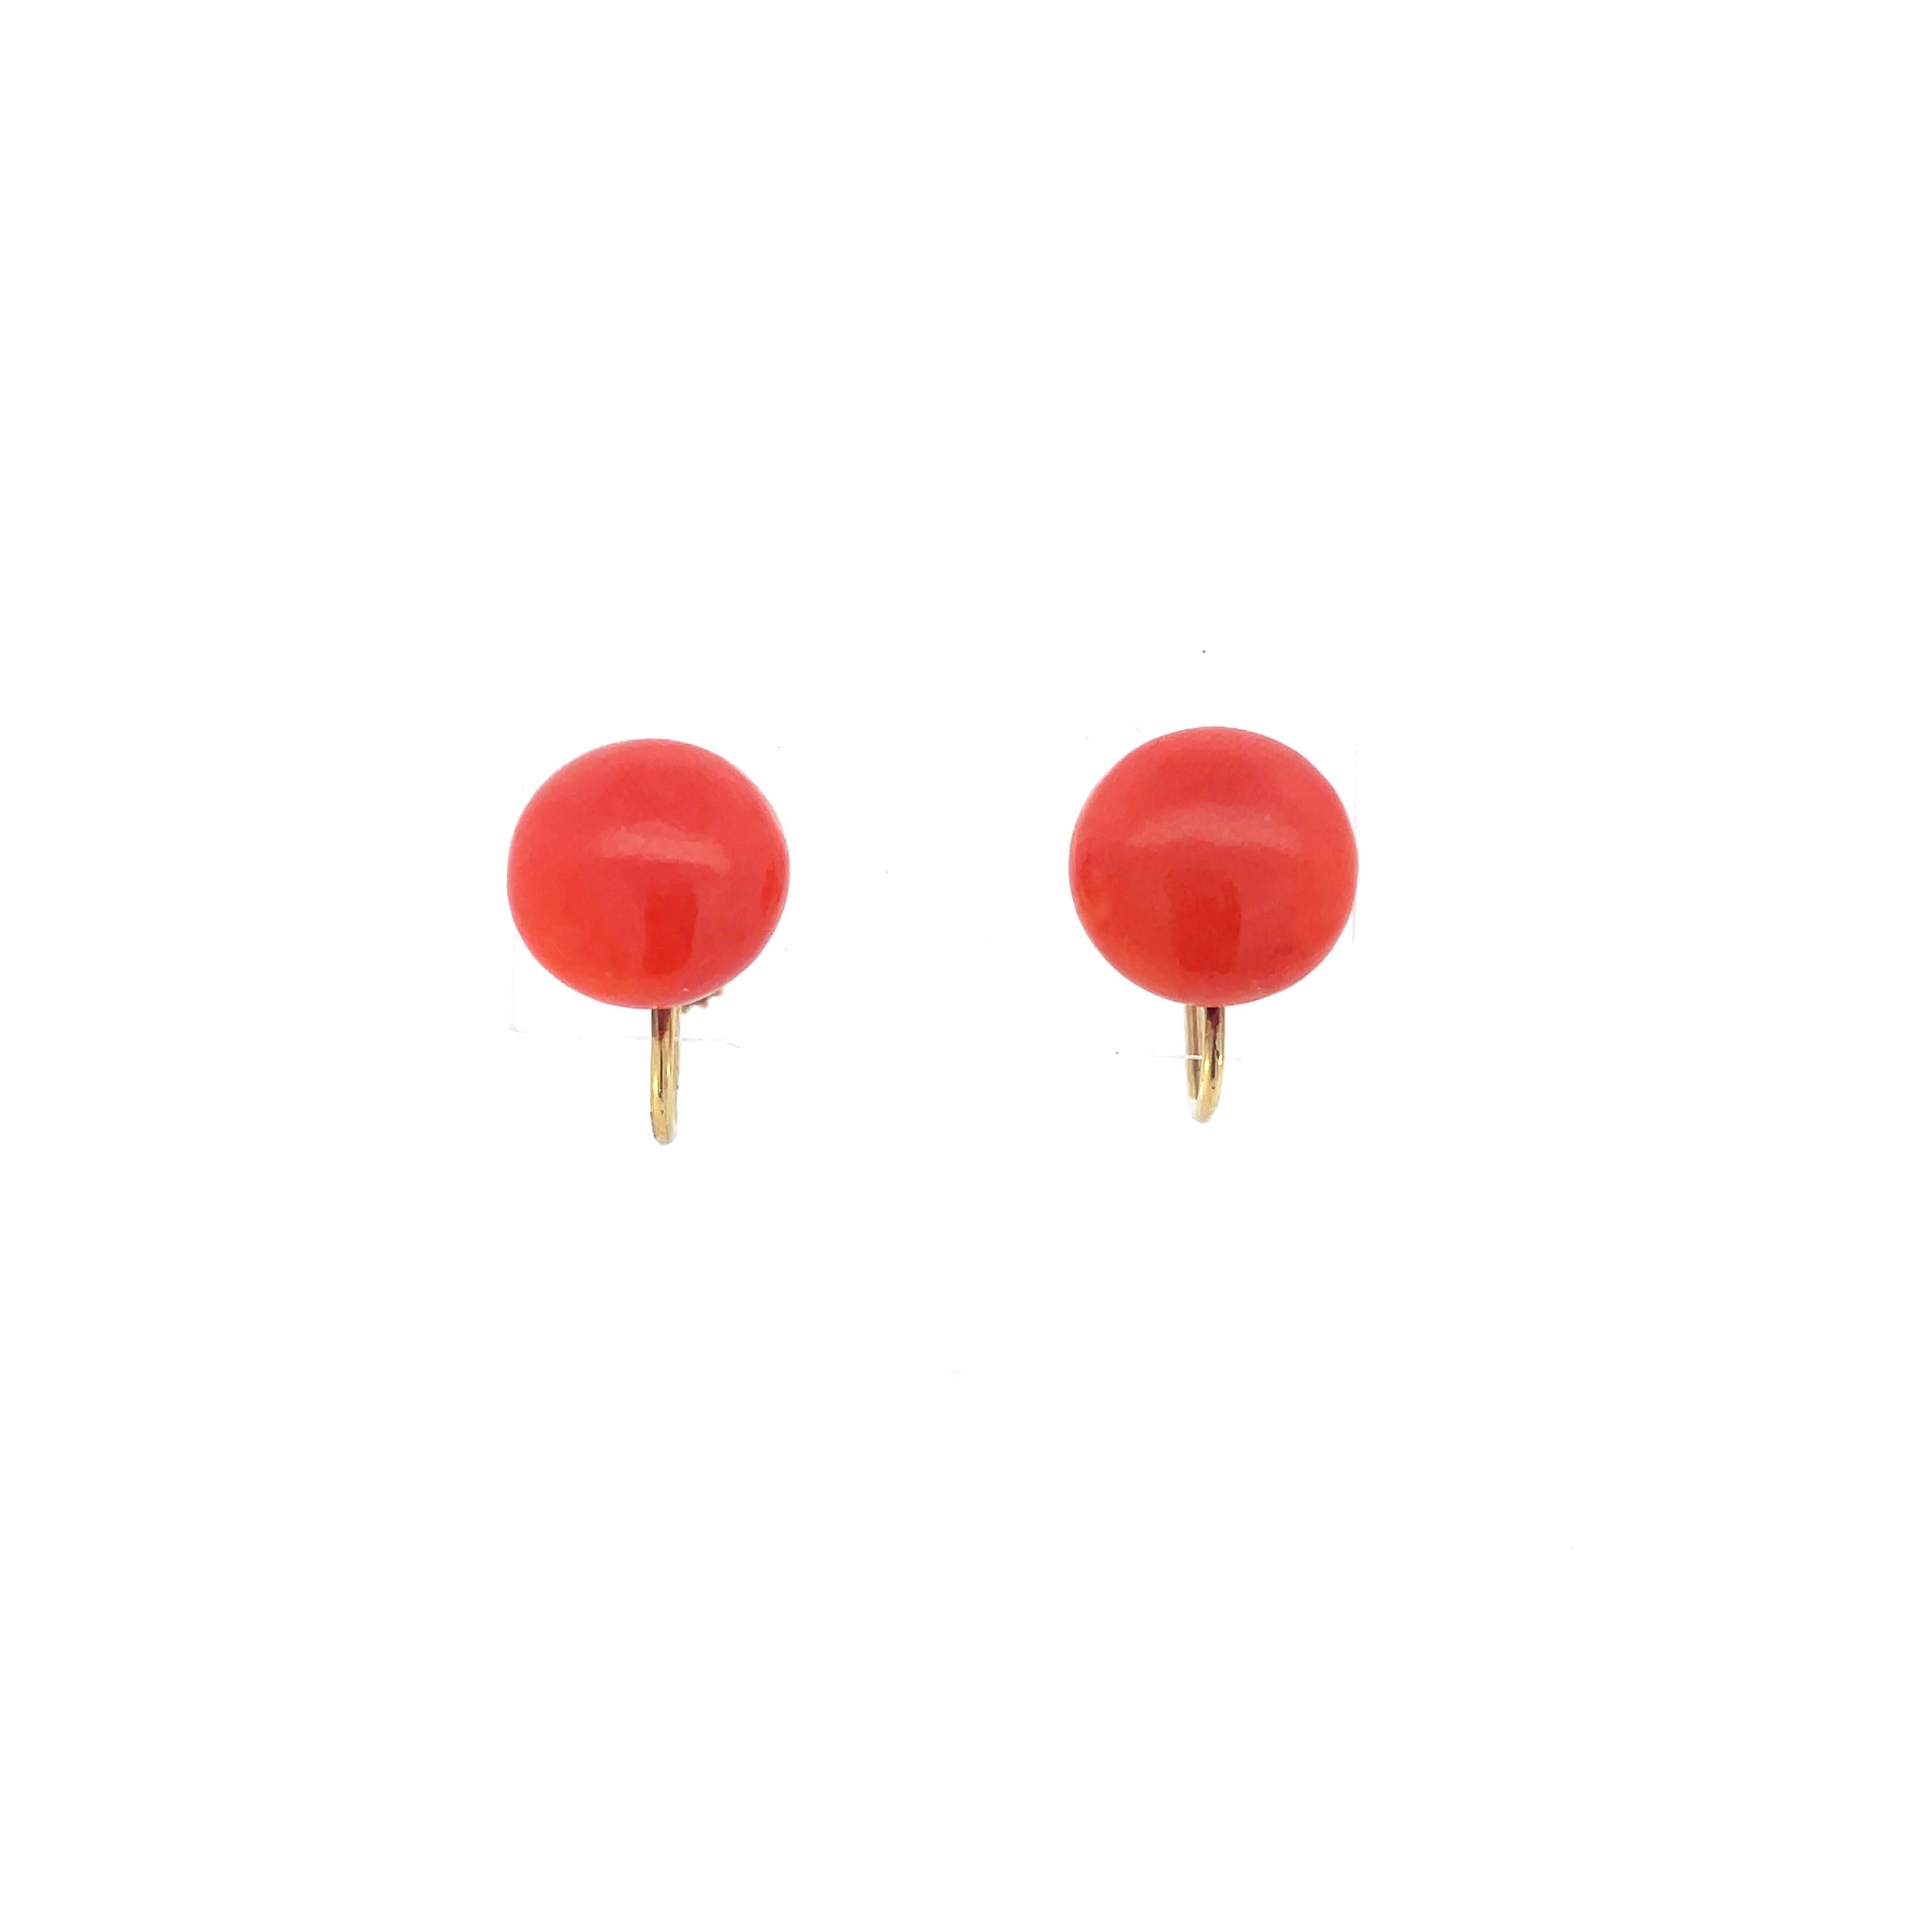 This is a timeless pair of early Art Deco screw-back earrings crafted in 18K yellow gold that showcases two natural coral buttons! These beautiful ocean gems were harvested in the 1920s, completely natural and undyed, and are a beautiful orange-red